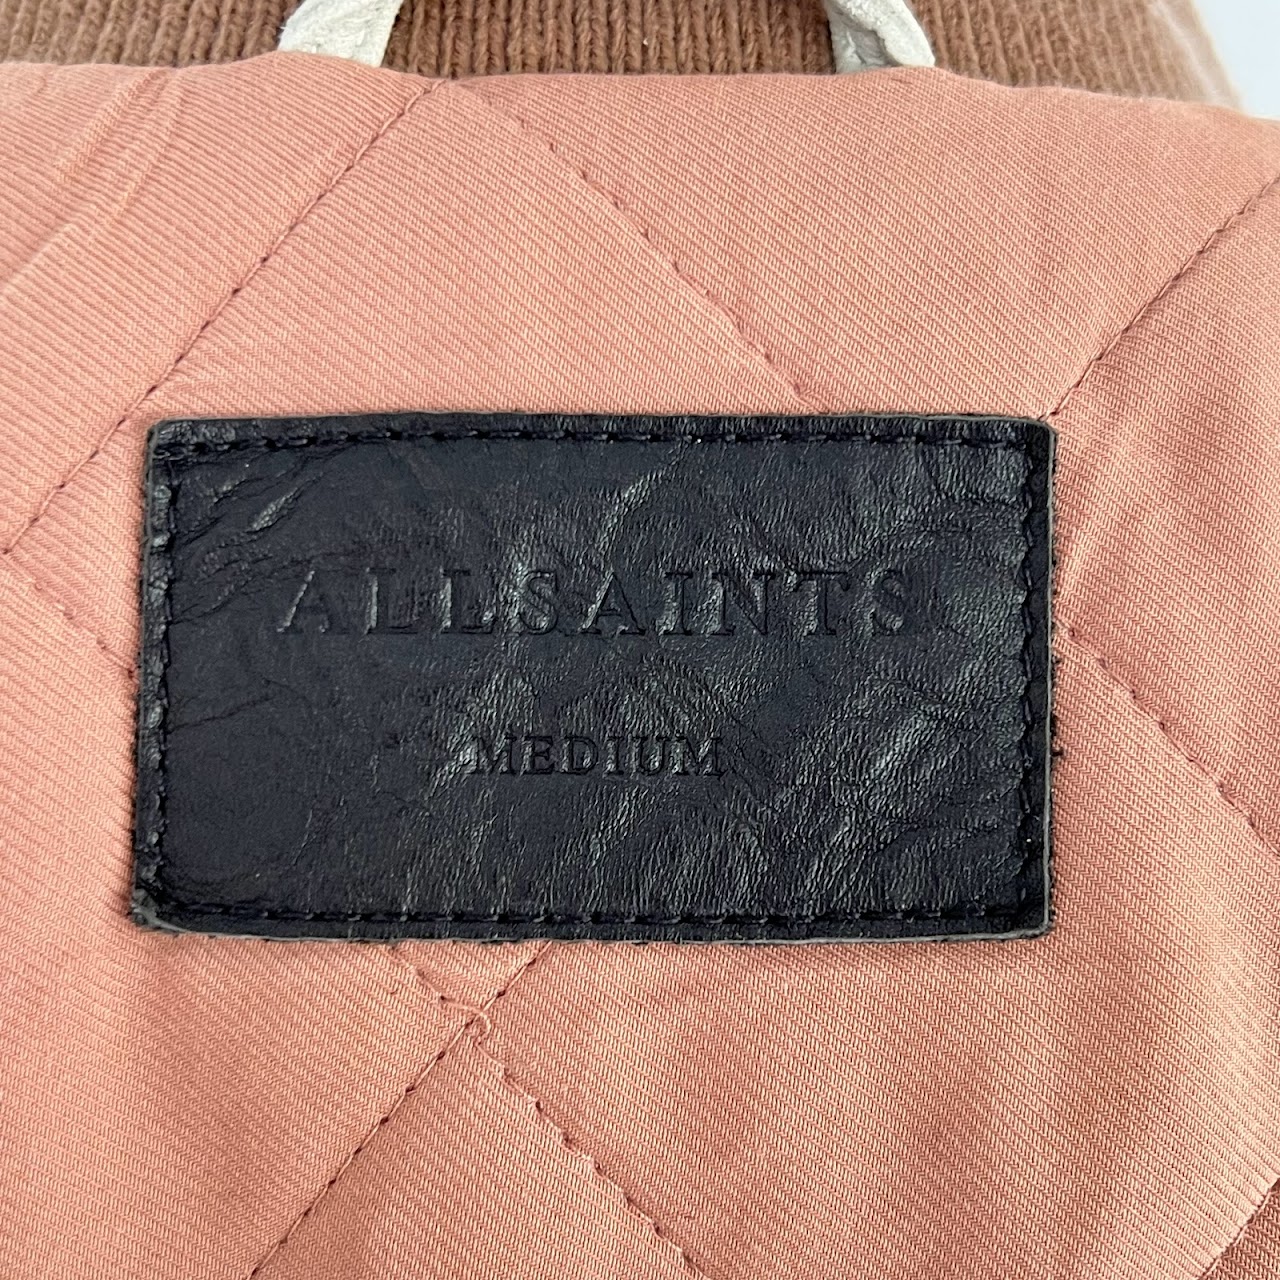 ALLSAINTS  Wool and Leather Varsity Jacket